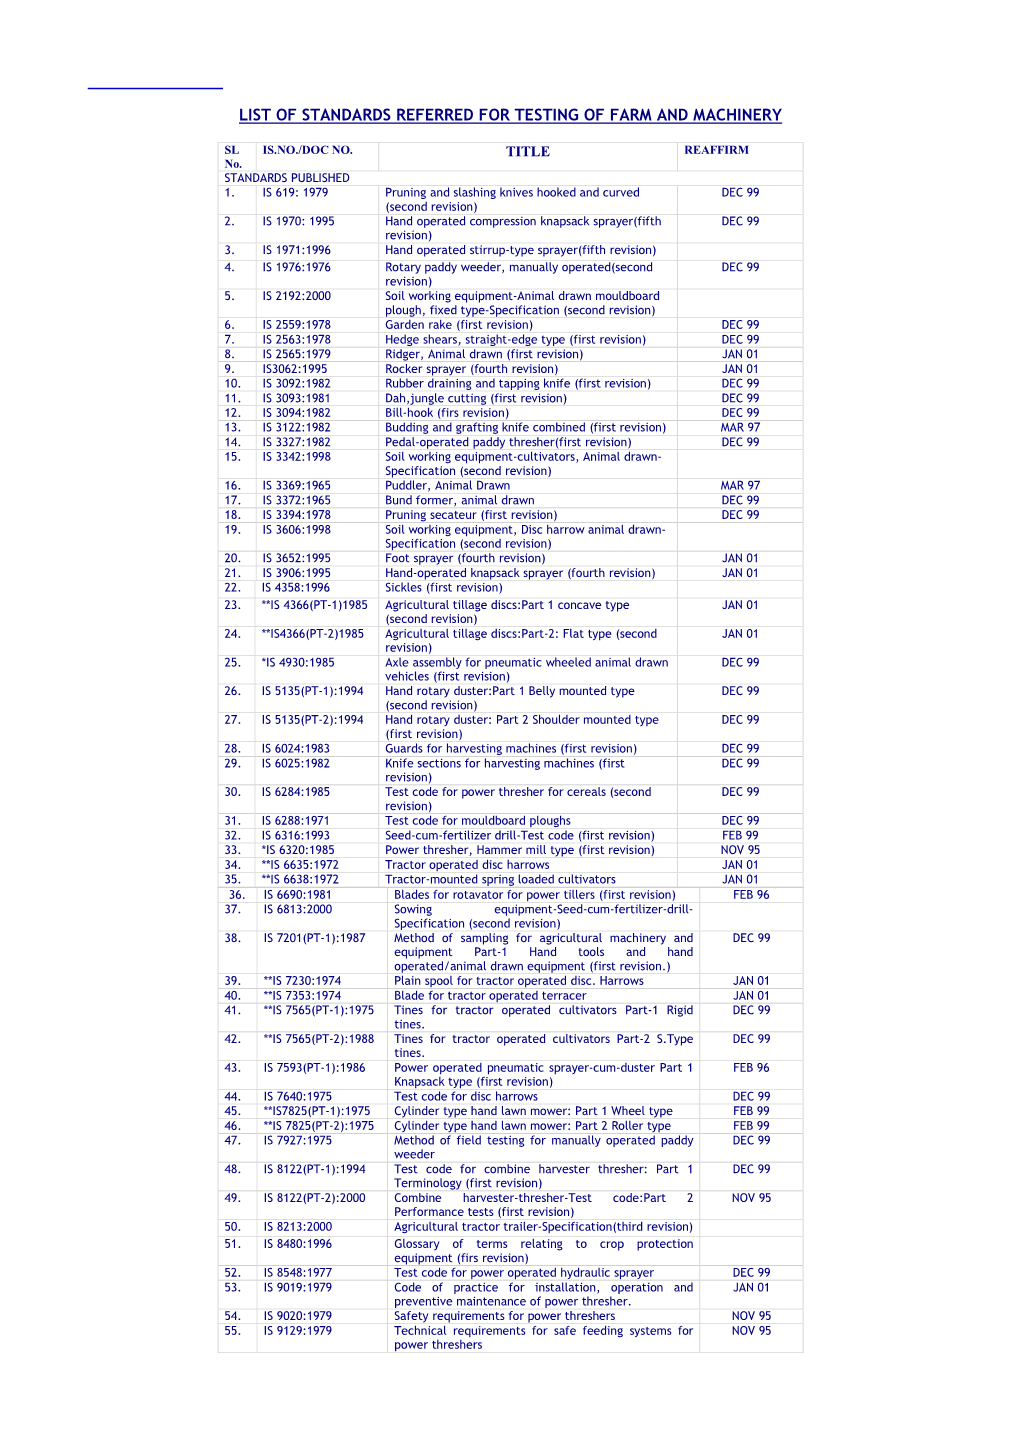 List of Standards Referred for Testing of Farm and Machinery